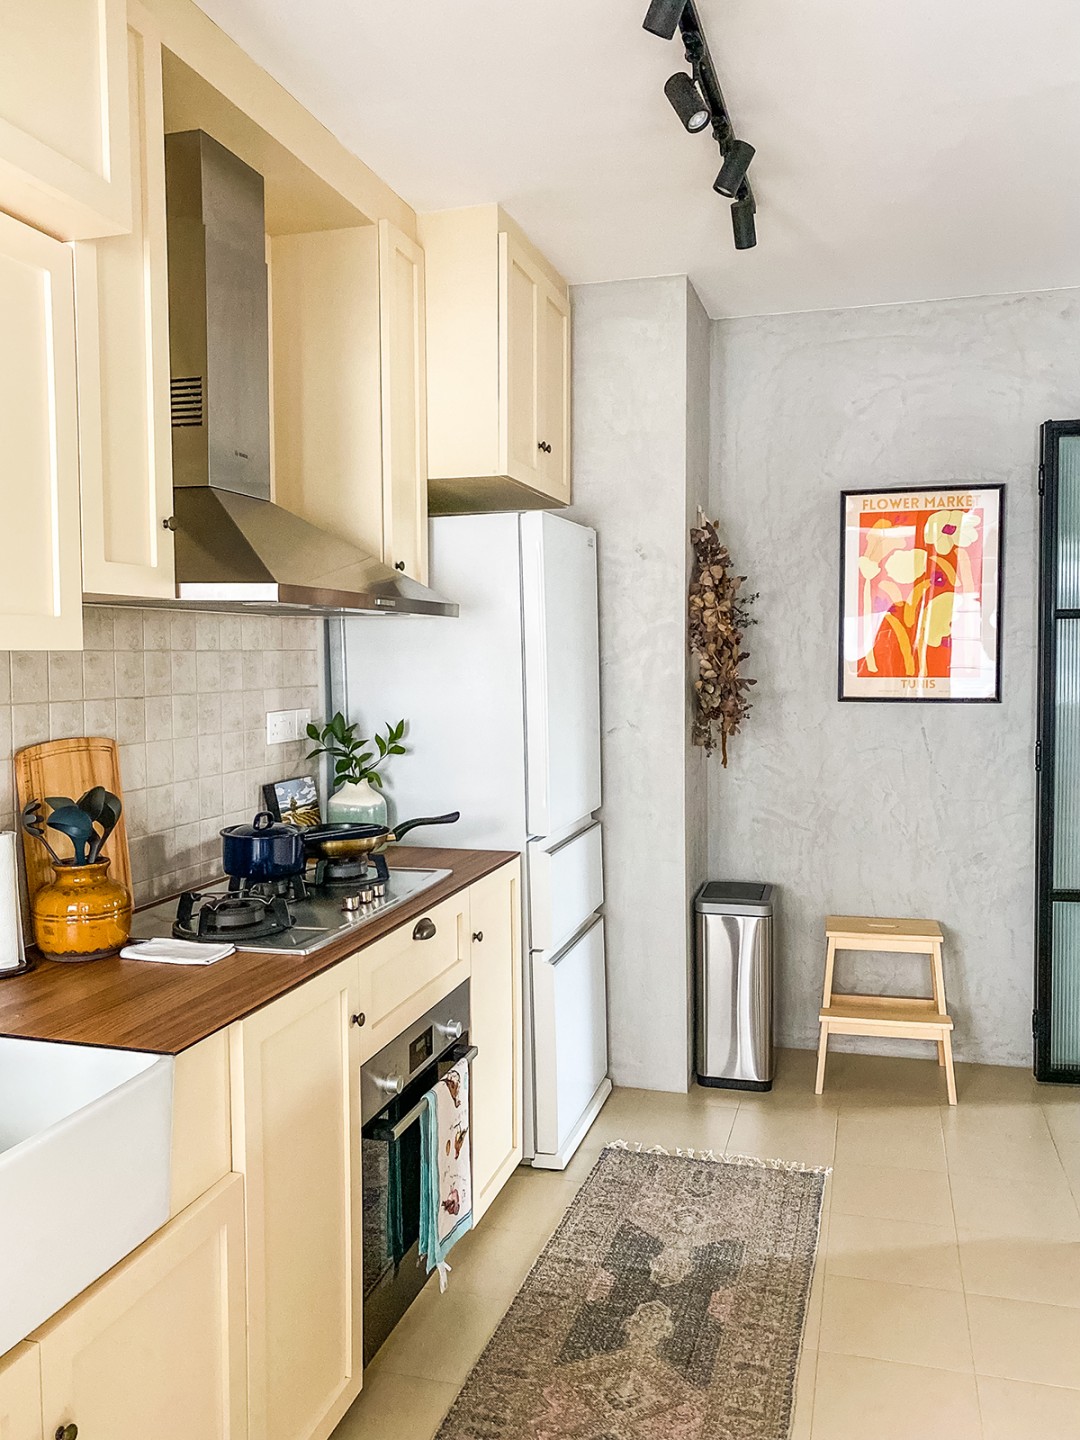 squarerooms cnbrr home fazlie corinne instagram bto flat account hdb homeowners interview singapore canberra mediterranean inspired design apartment style kitchen rustic traditional cream beige cabinets old retro charm